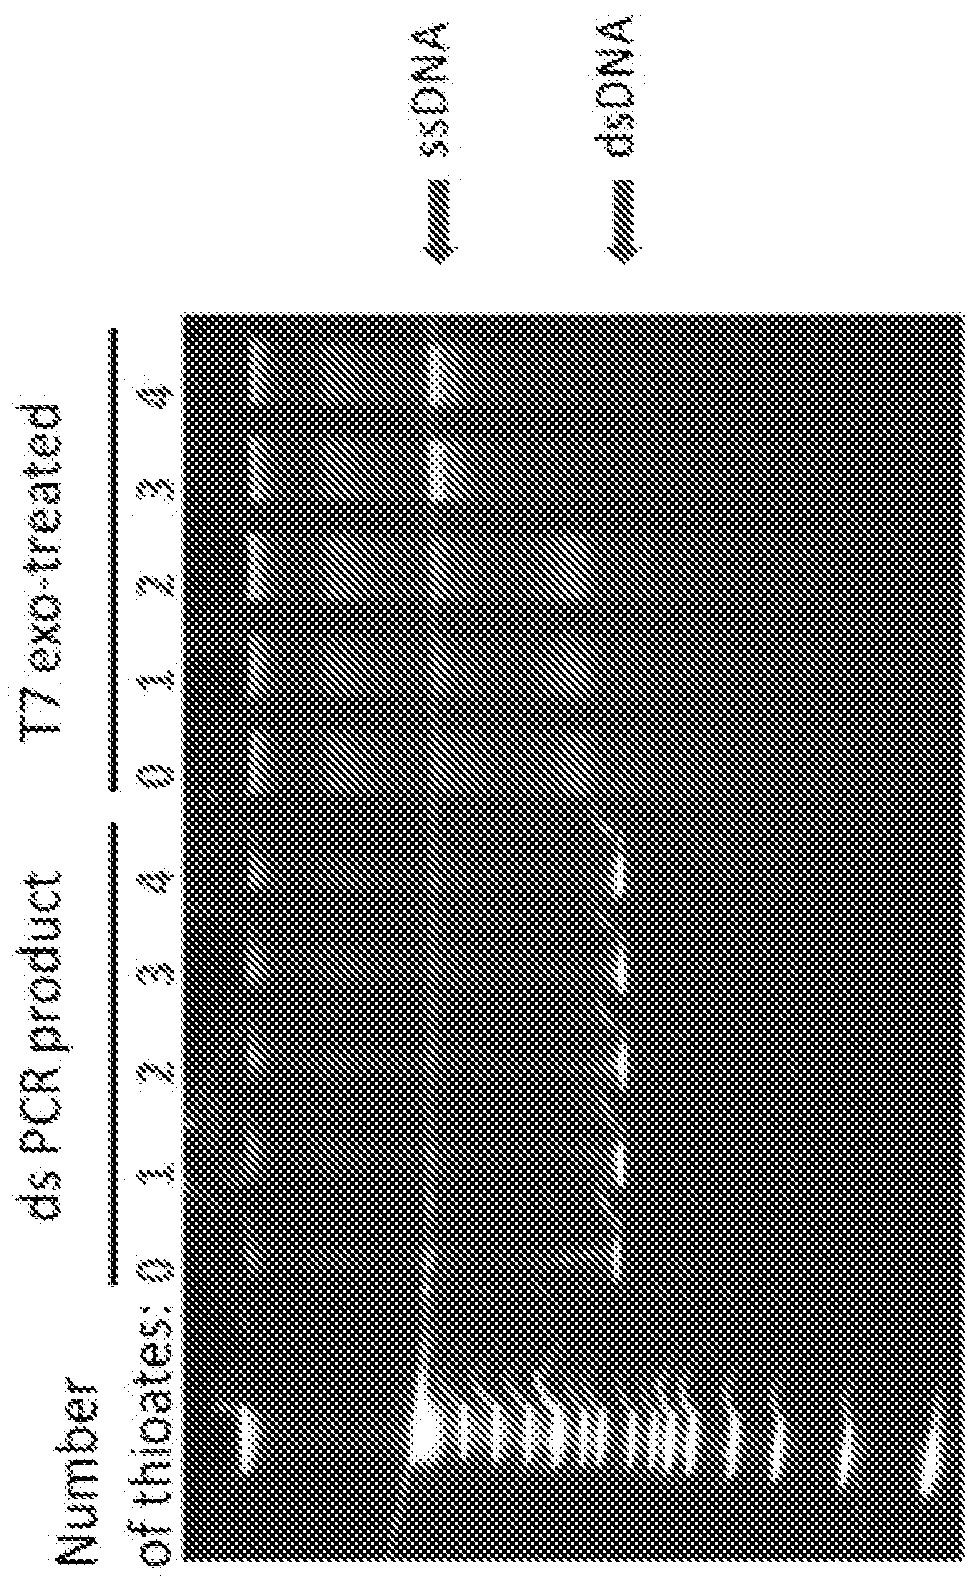 Methods for the production of libraries for directed evolution